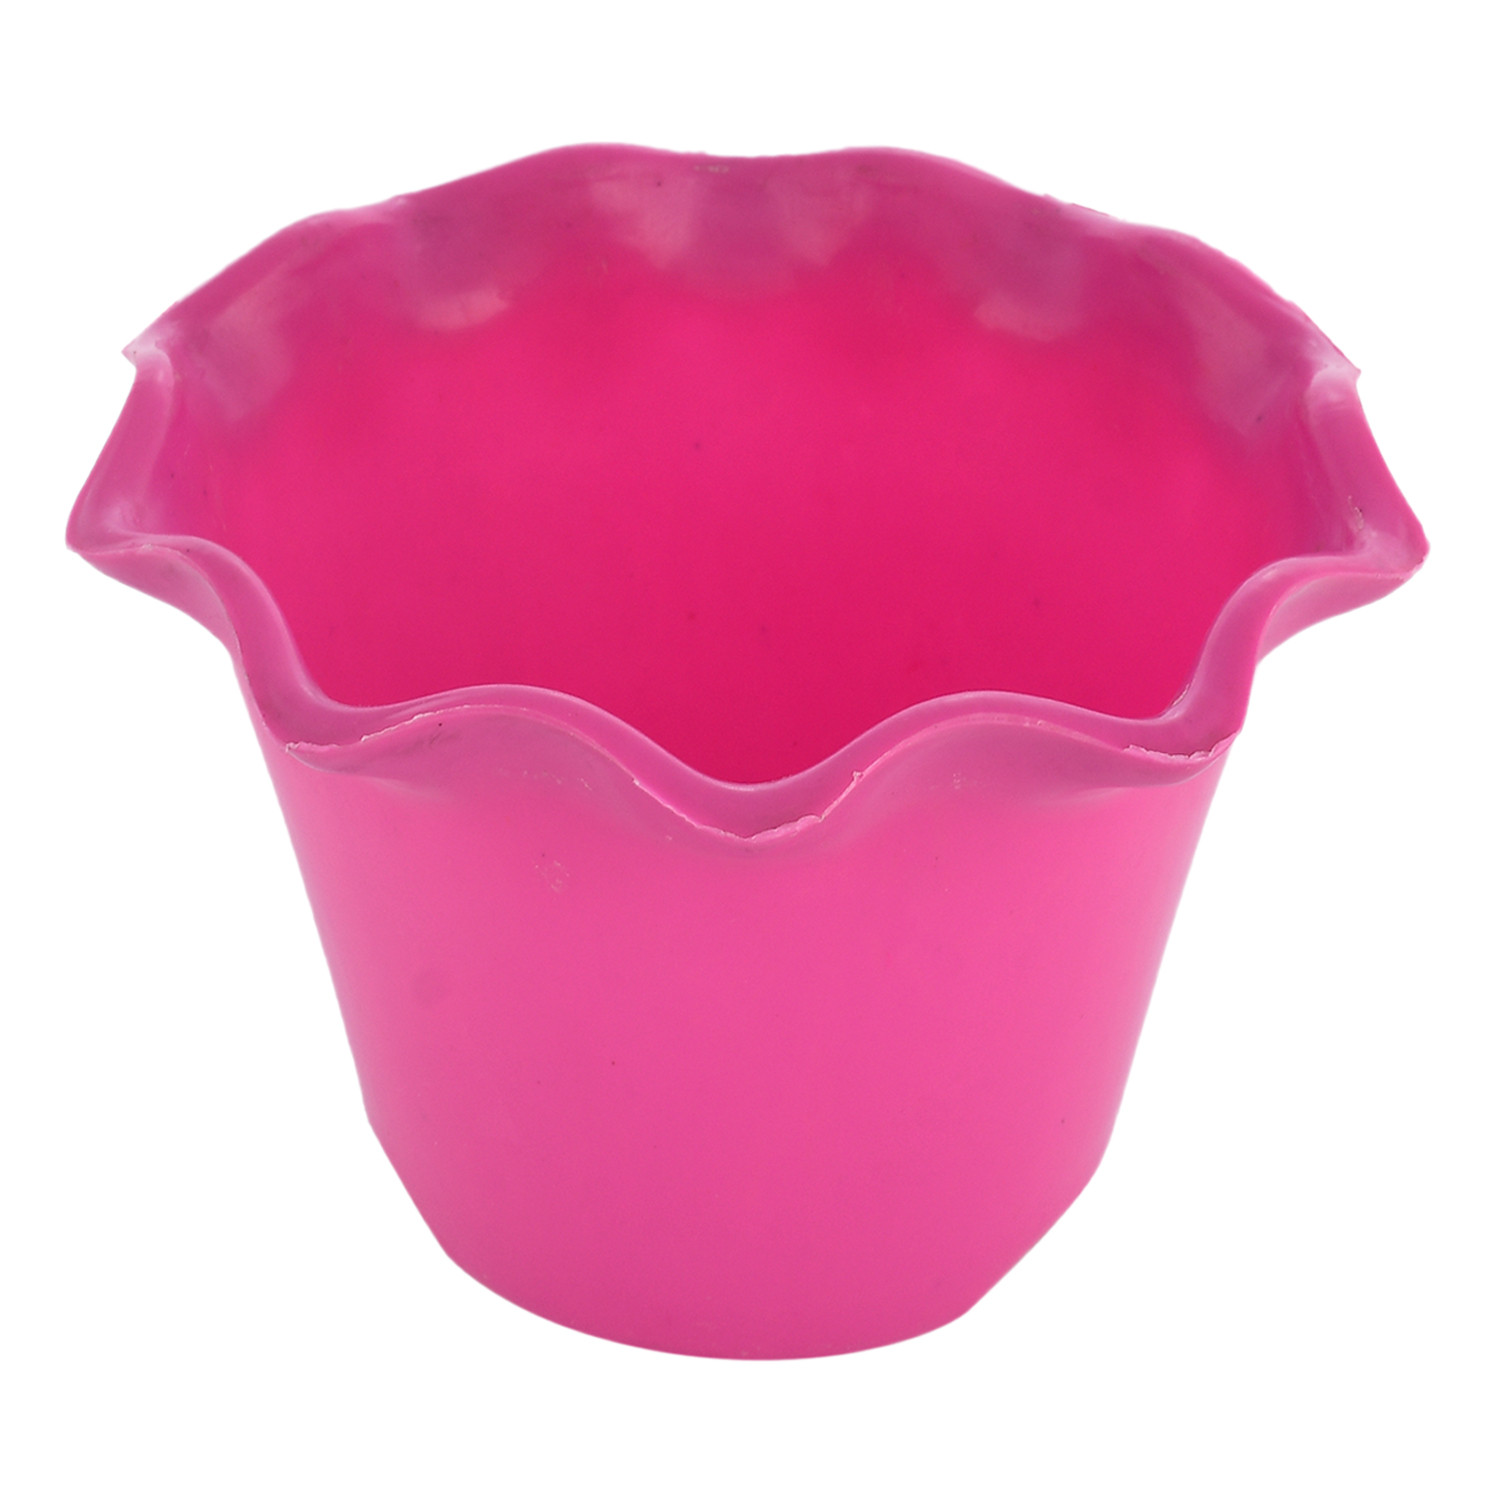 Kuber Industries Blossom Flower Pot|Durable Plastic Flower Pots|Planters for Home Décor|Garden|Living Room|Balcony|Pack of 2 (Pink & Green)